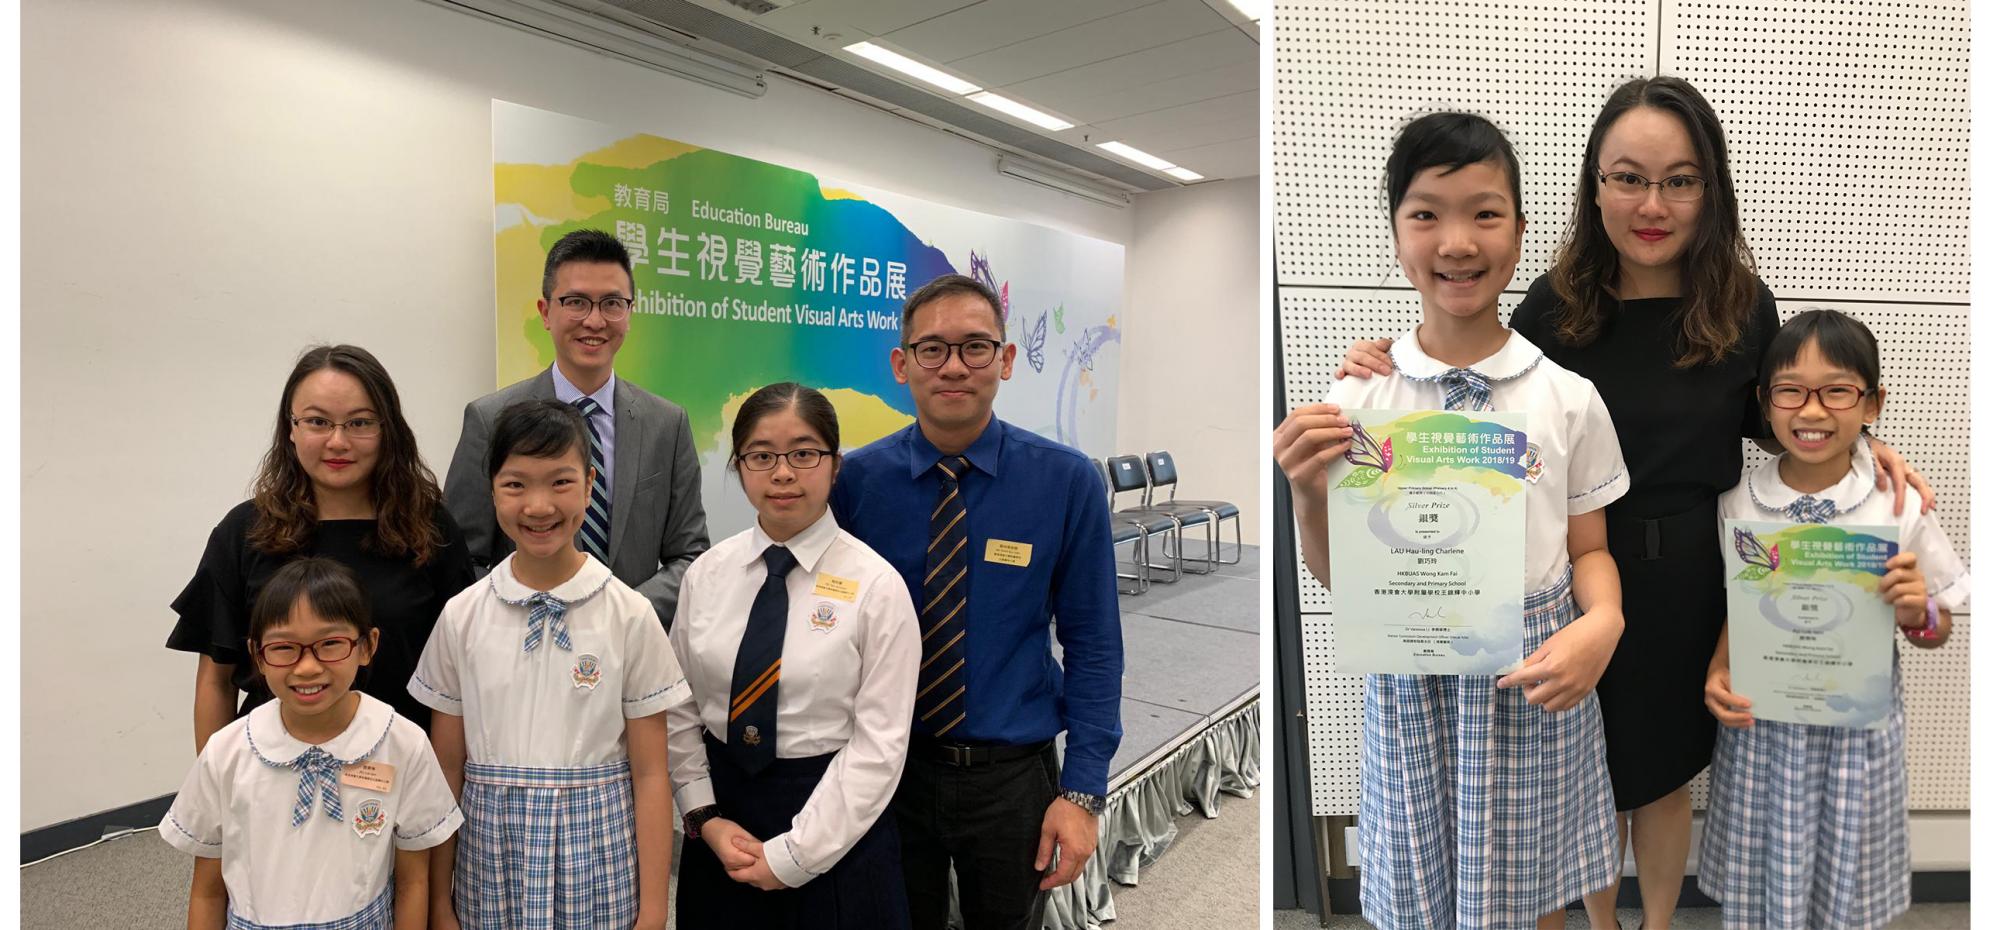 Students were awarded Silver Prize and their works were exhibited at the Exhibition of Student Visual Arts Work by the Education Bureau